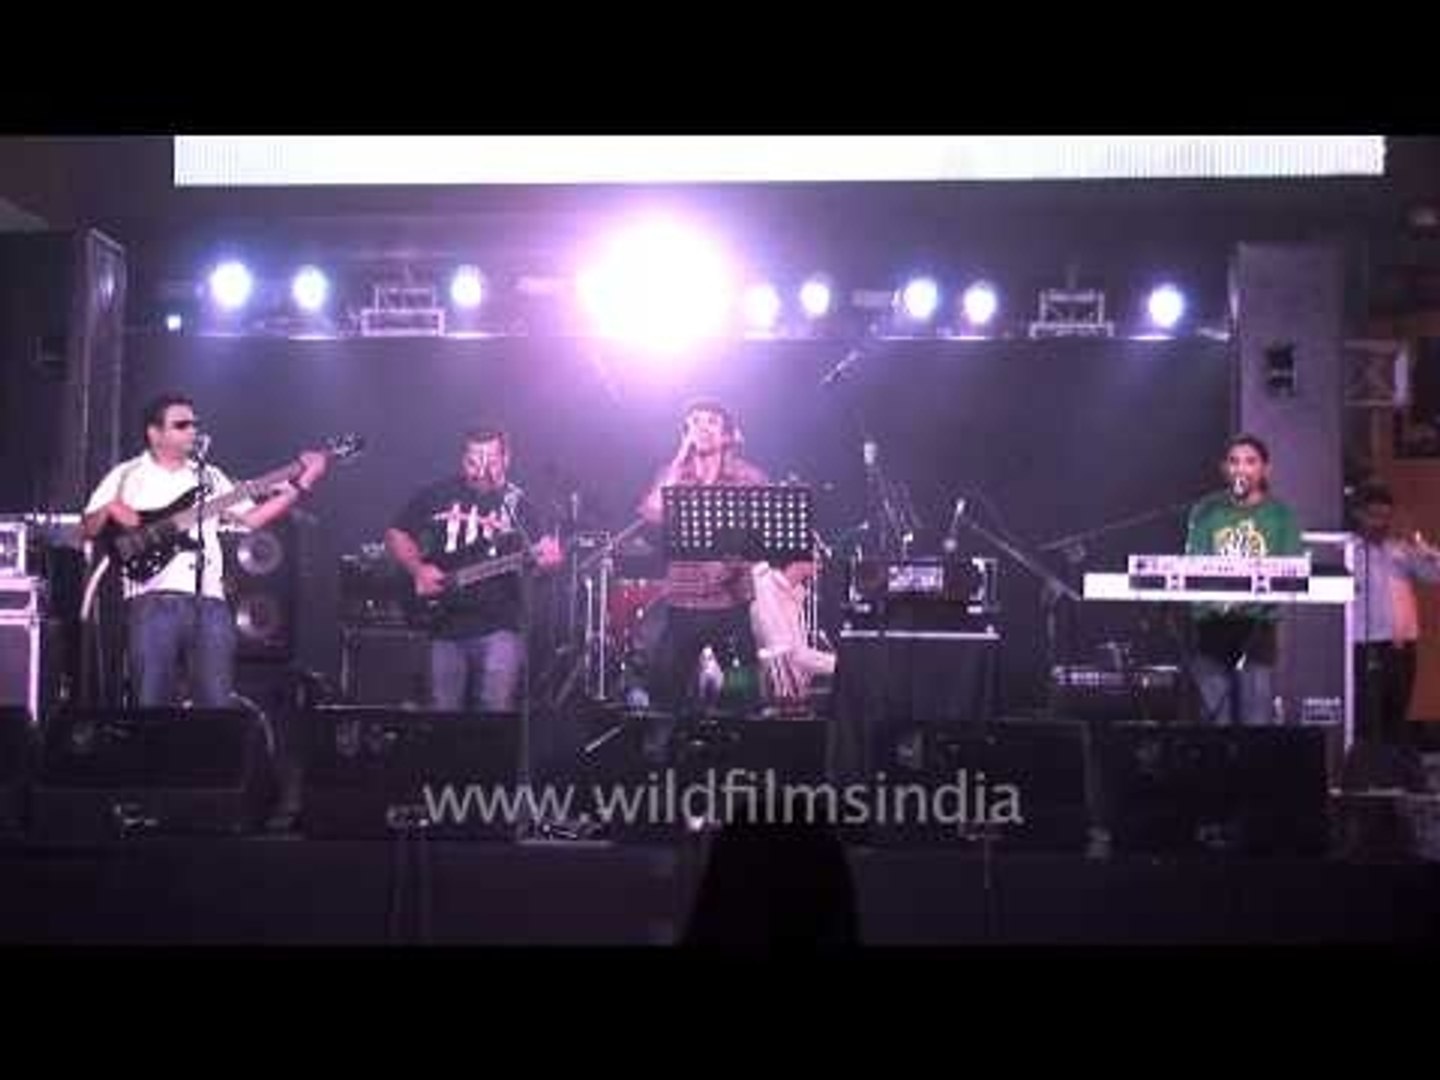 Indian musicians performing a hit Bollywood song